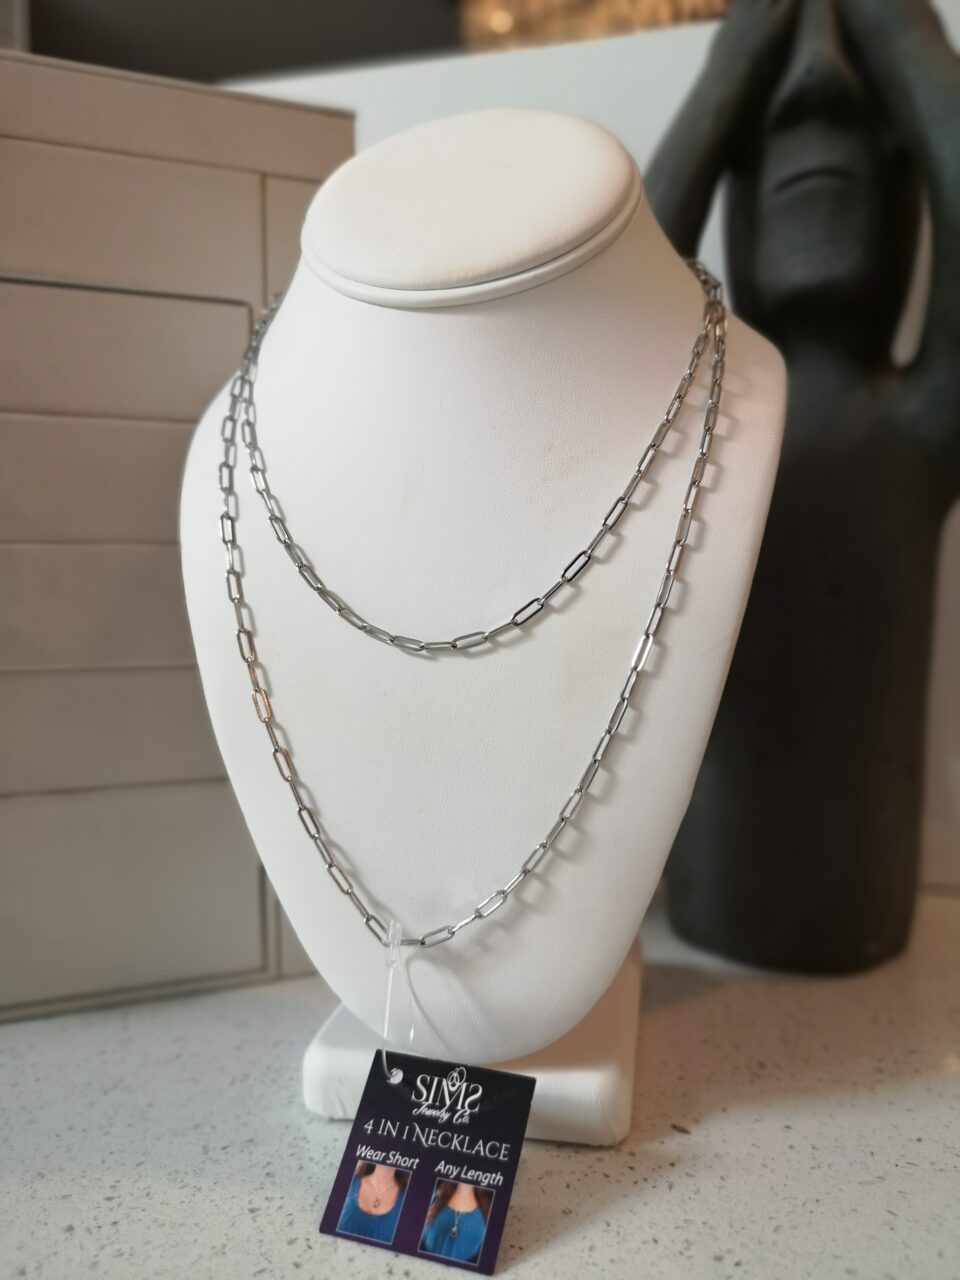 Sims jewelry. Long silver chain.